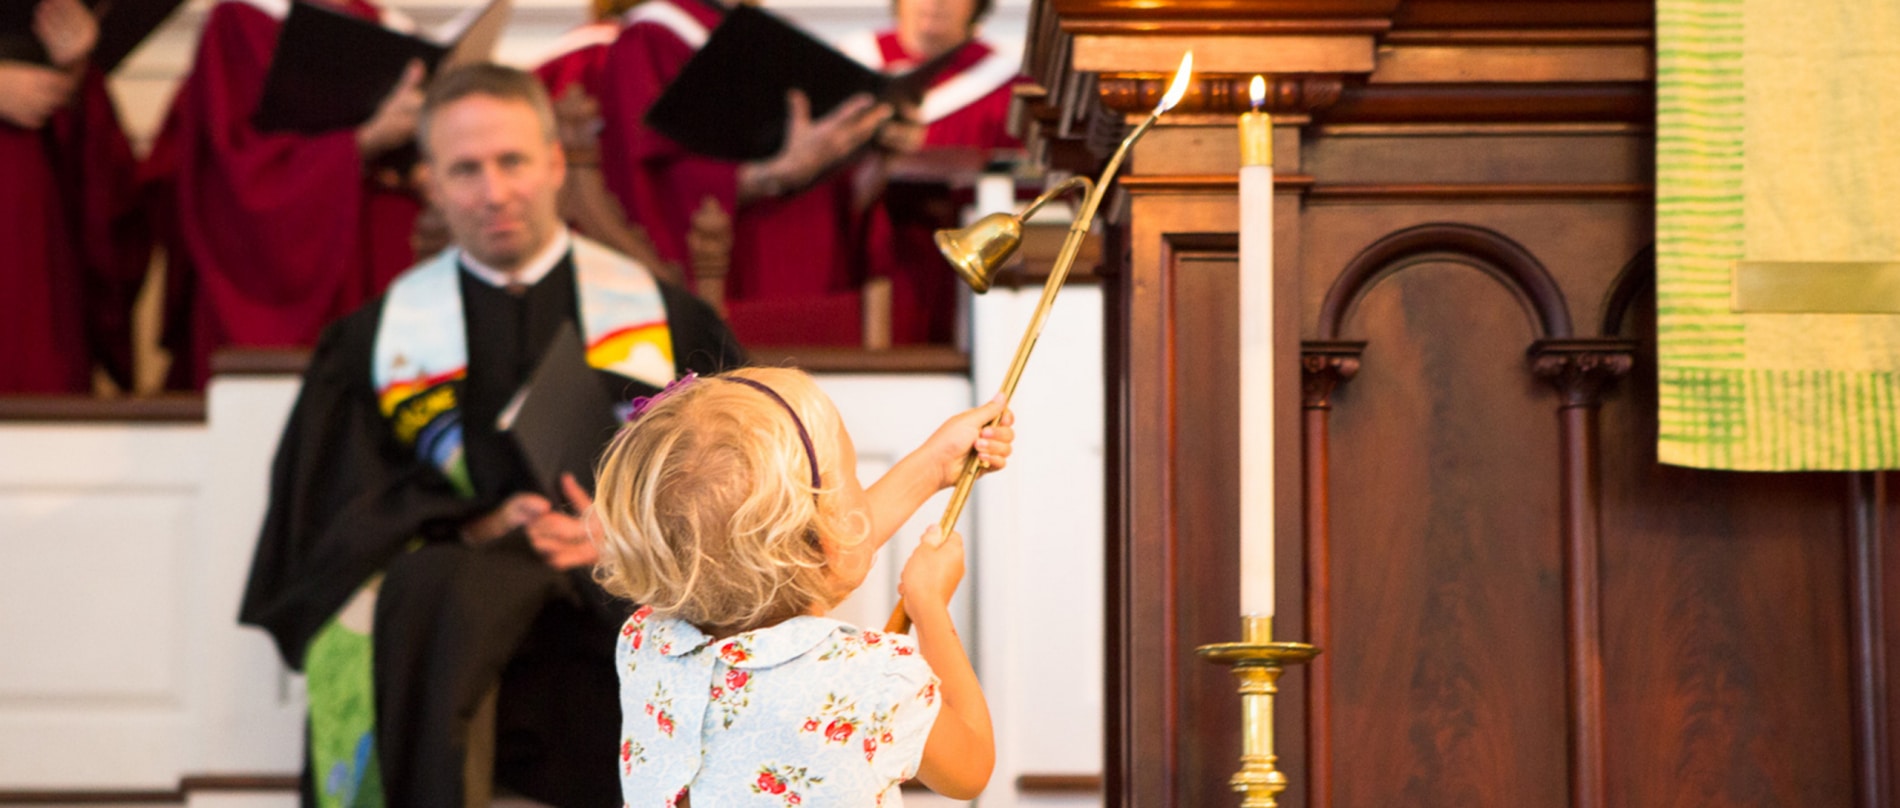 A young girl lights a candle to begin worship